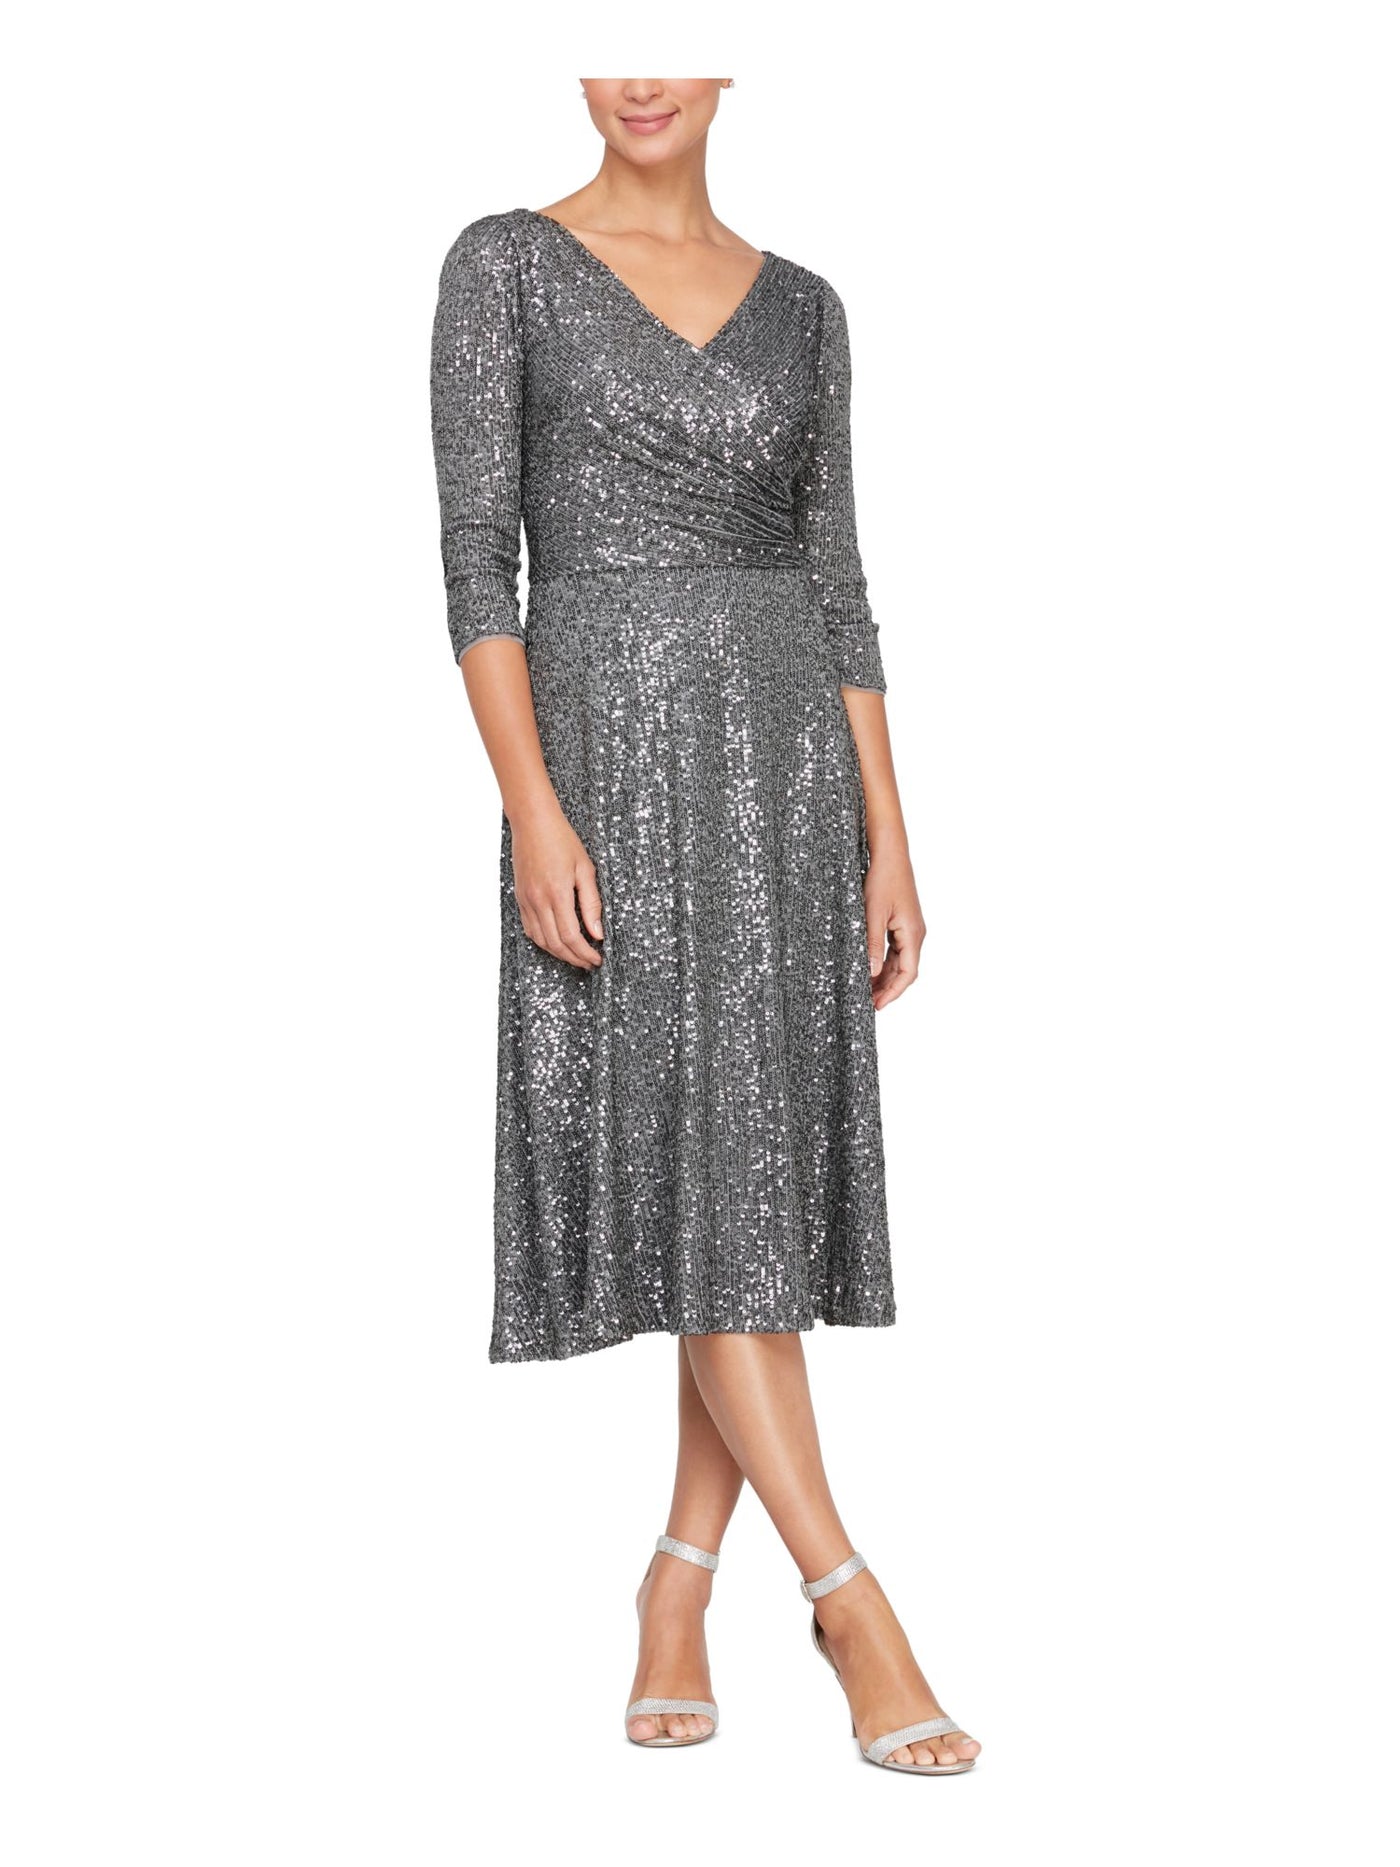 ALEX EVENINGS Womens Gray Sequined Zippered Lined Pleated 3/4 Sleeve Surplice Neckline Midi Evening Fit + Flare Dress 10